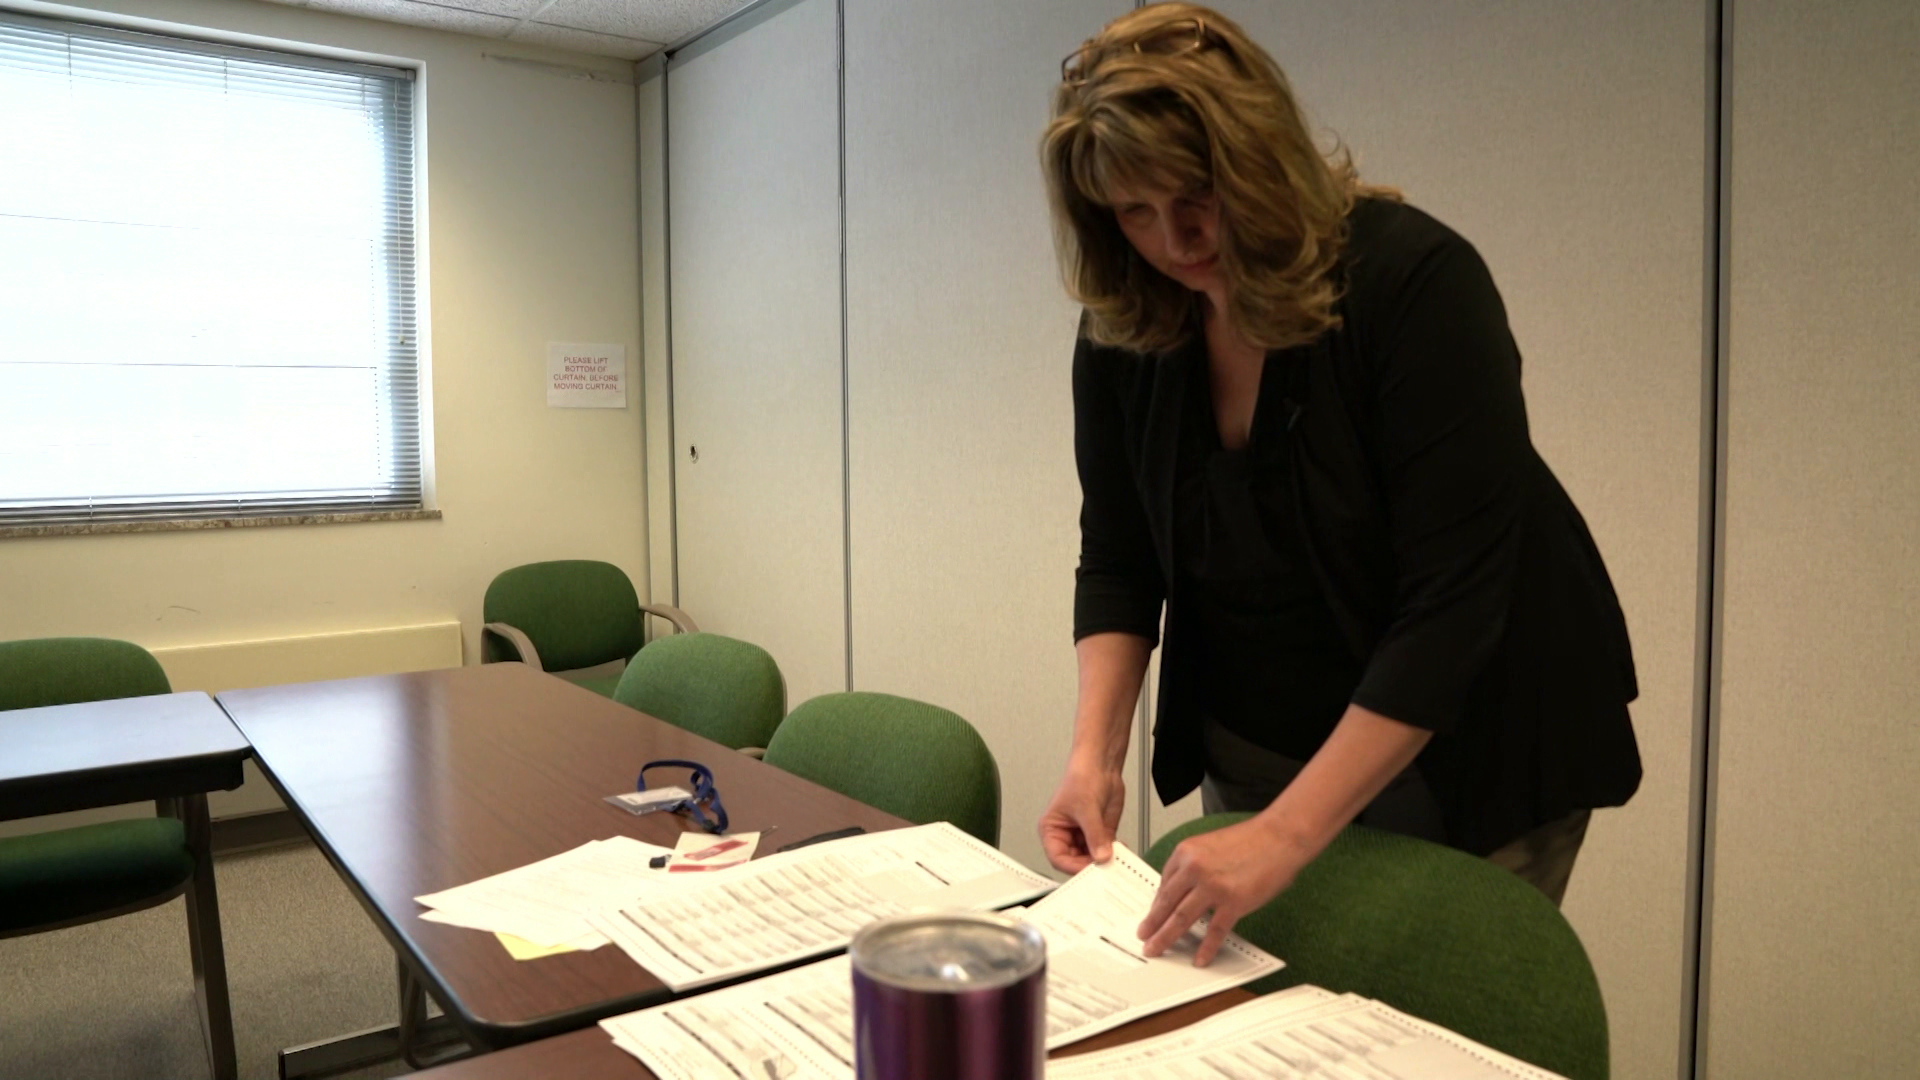 Lisa Tollefson stands in a conference room, paging through stacks of papers on a table.